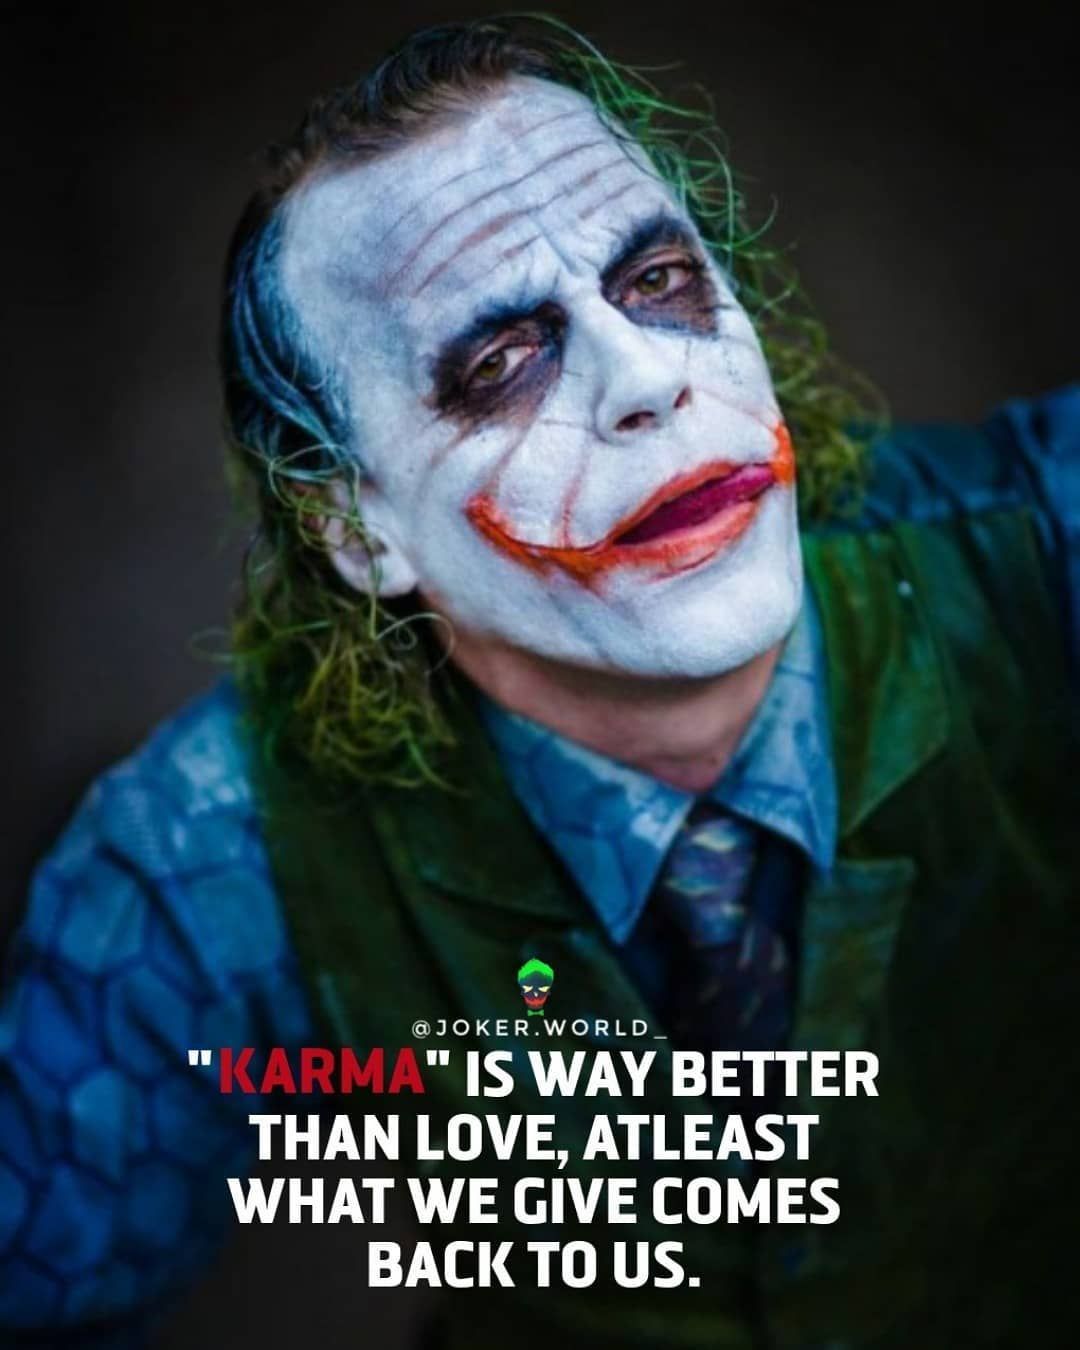 Get For Free The Joker Phone Case 2019 #jokerquote #jokerquotes #jokermotivation #jokermovie #jokermemes #jokerlovers #jok. Best joker quotes, Joker quotes, Joker